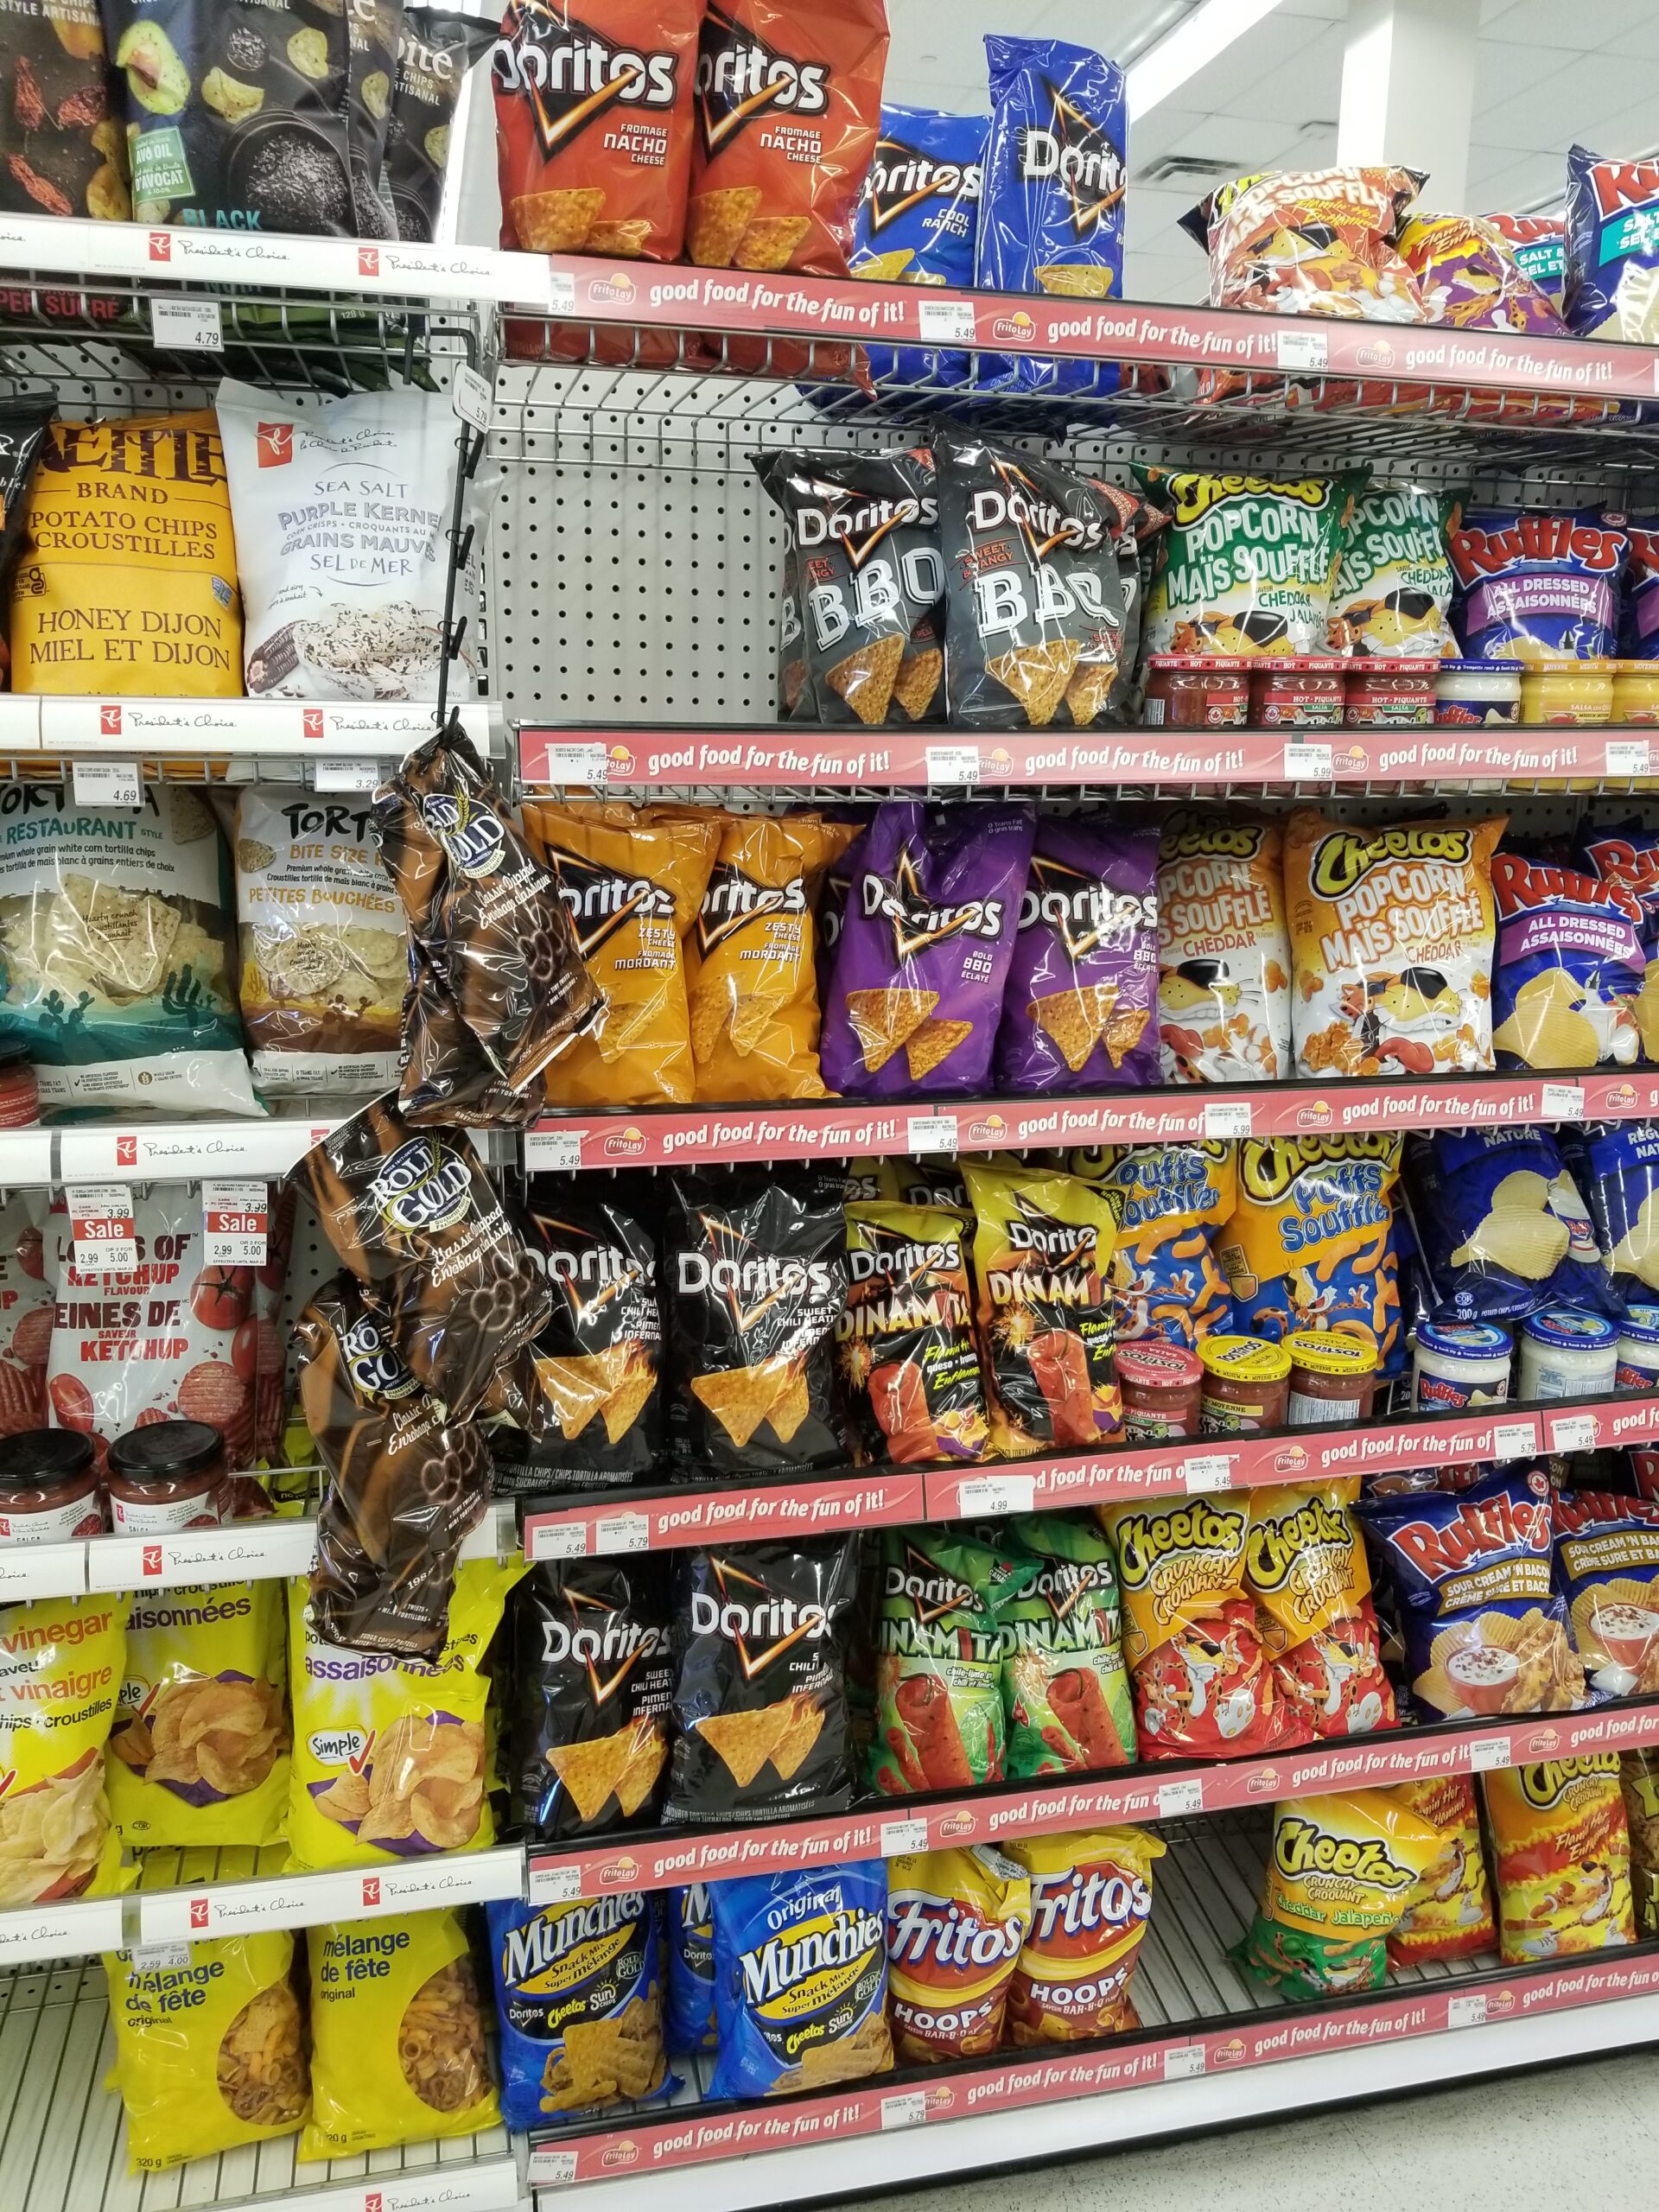 Doritos complaint Always out of stock everywhere!